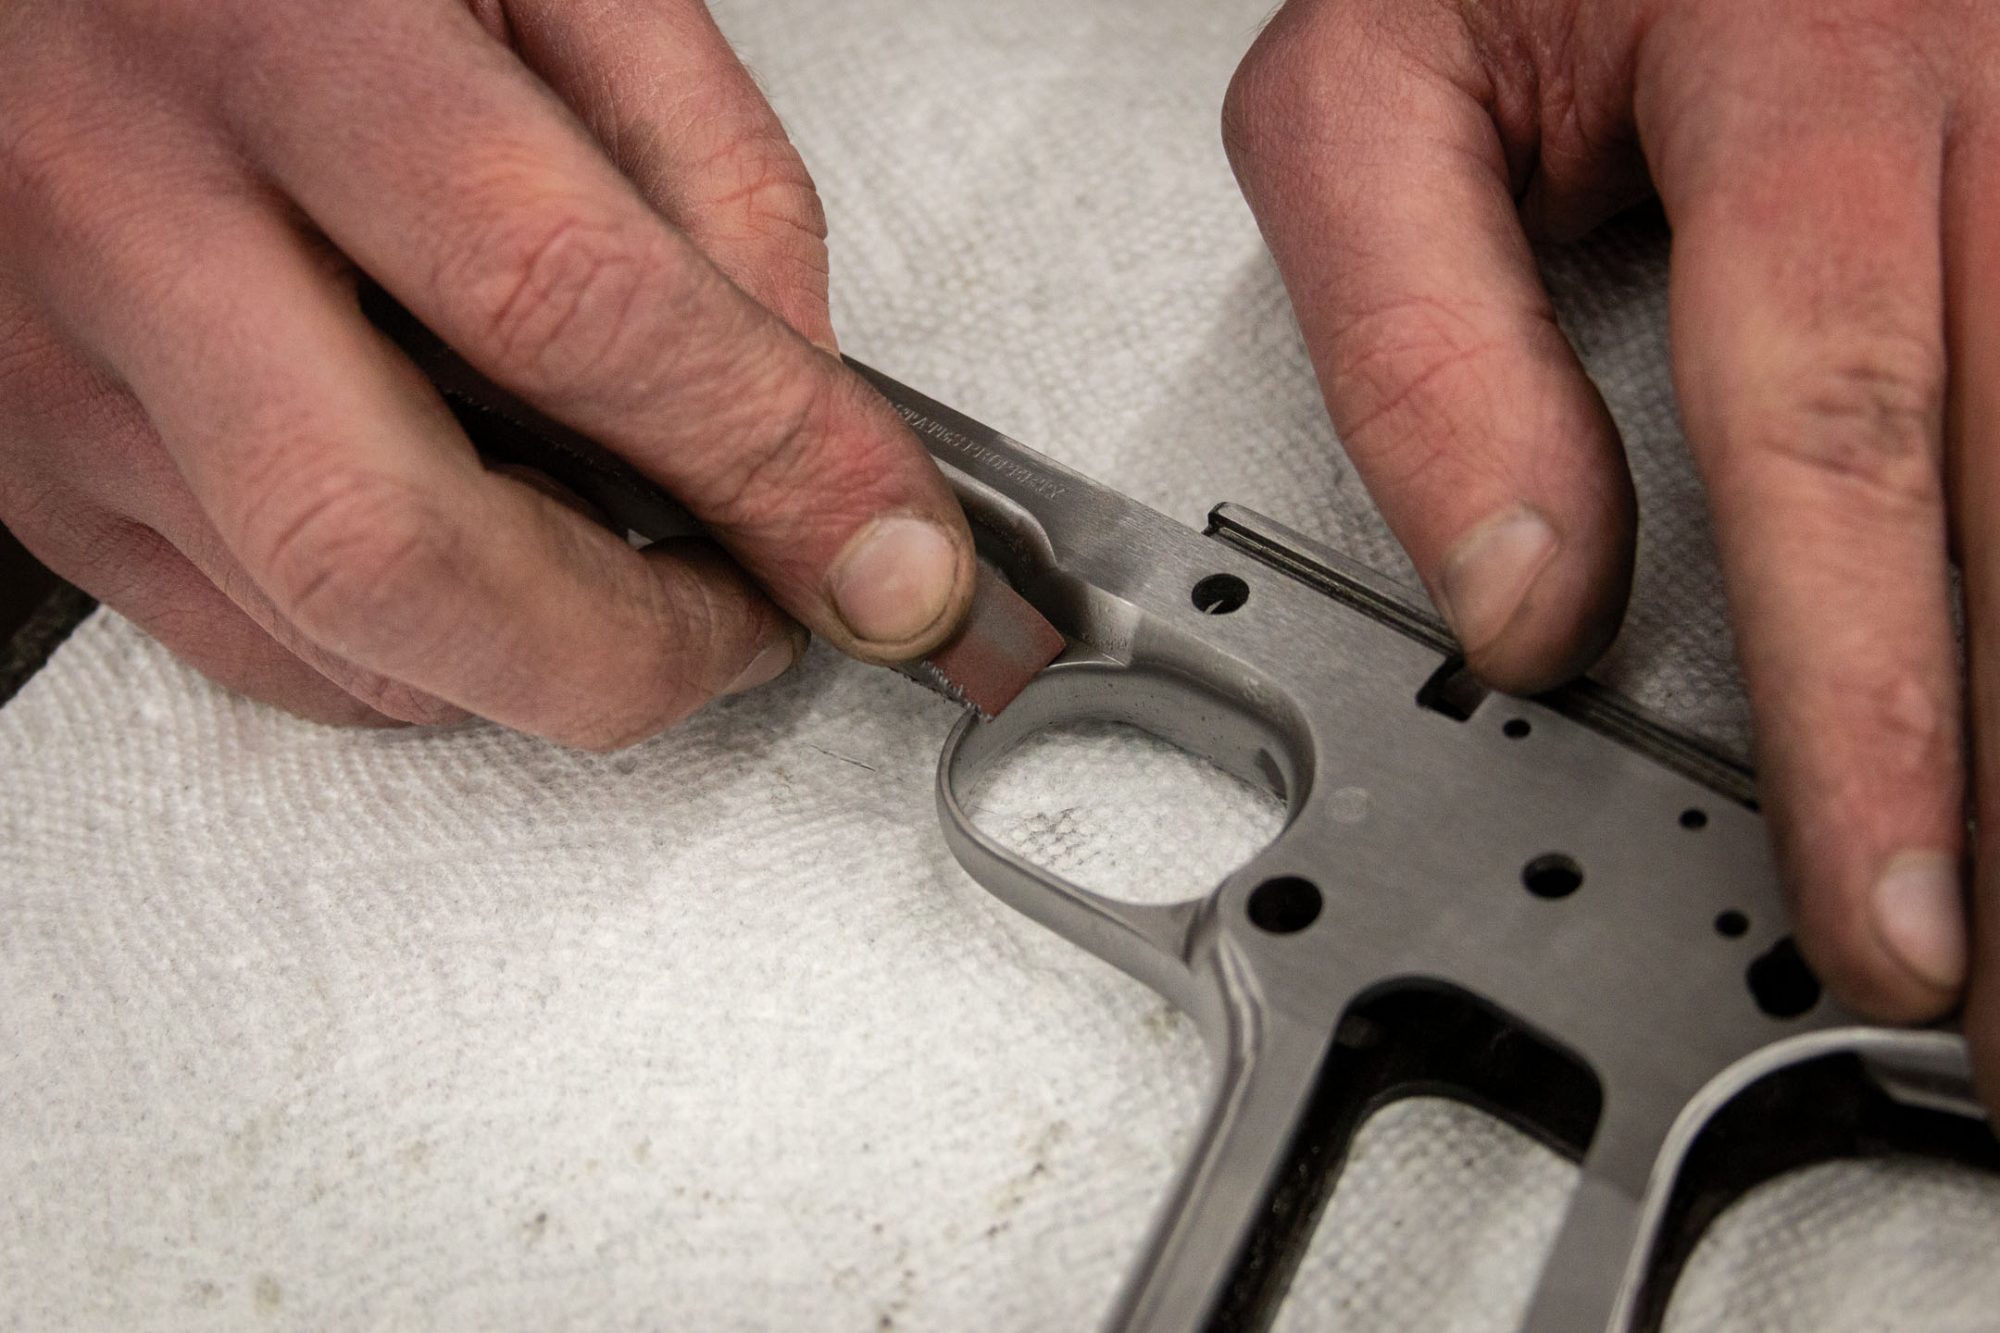 Colt NRA Model 1911 U.S. Army service pistol, during restoration process by Turnbull Restoration Co. of Bloomfield, NY